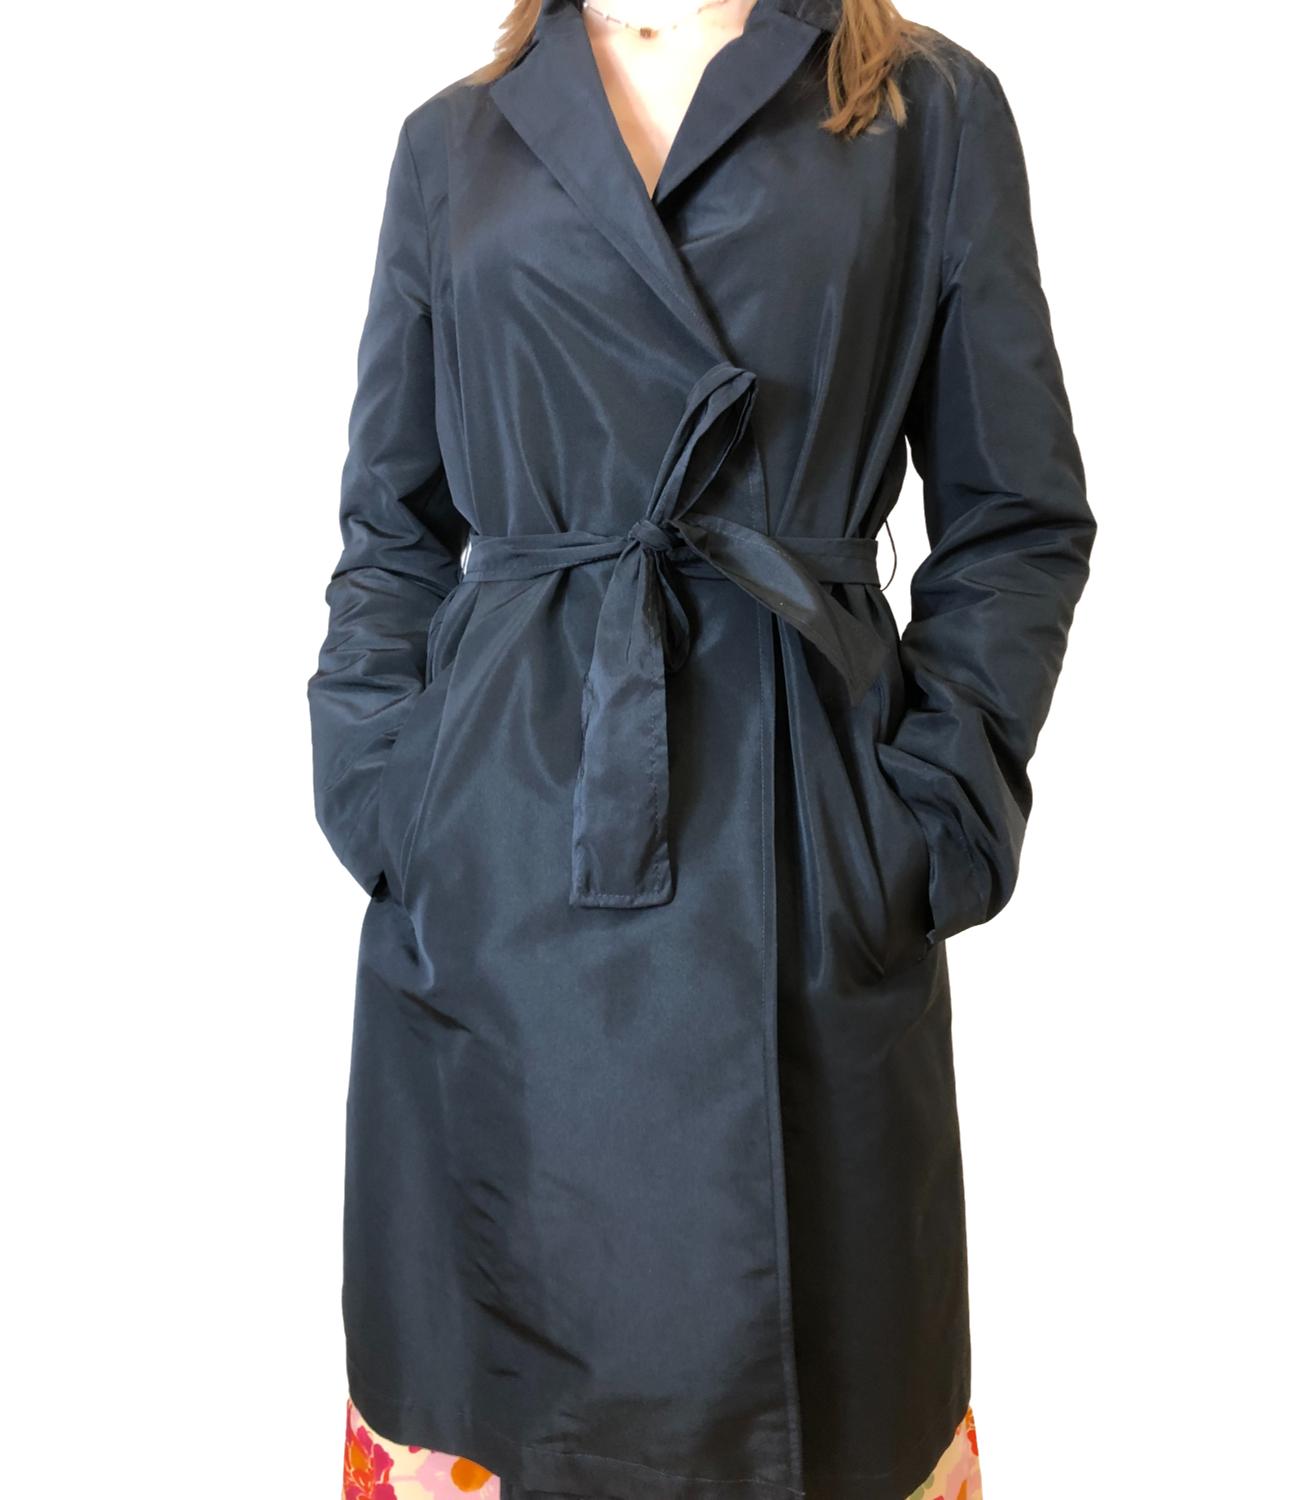 Impermeabile/trench PAOLO blu notte donna